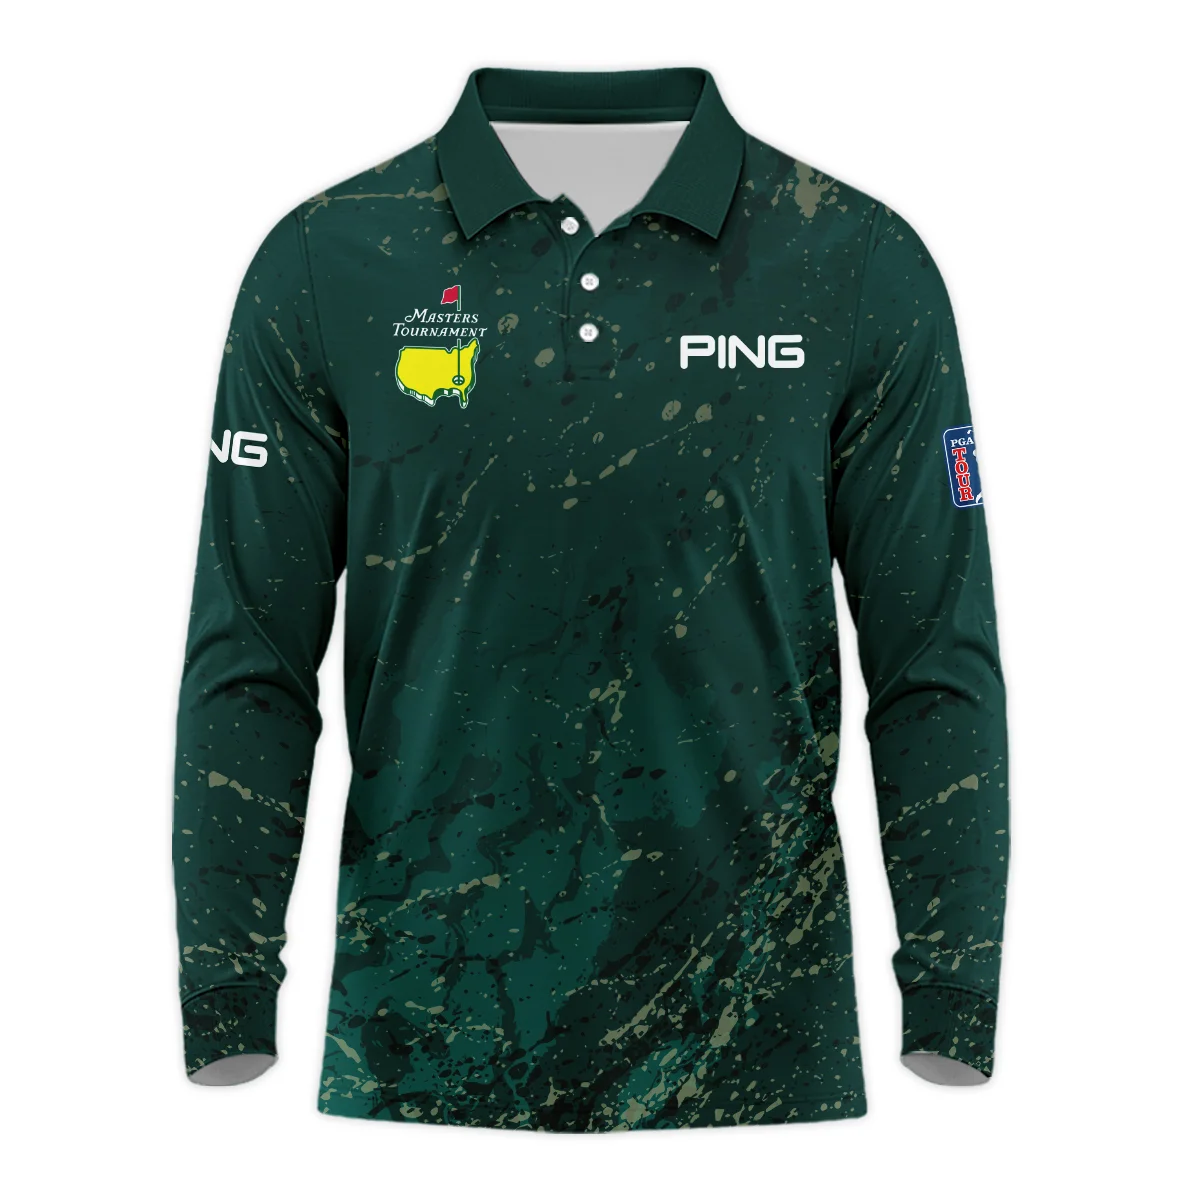 Old Cracked Texture With Gold Splash Paint Masters Tournament Ping Long Polo Shirt Style Classic Long Polo Shirt For Men